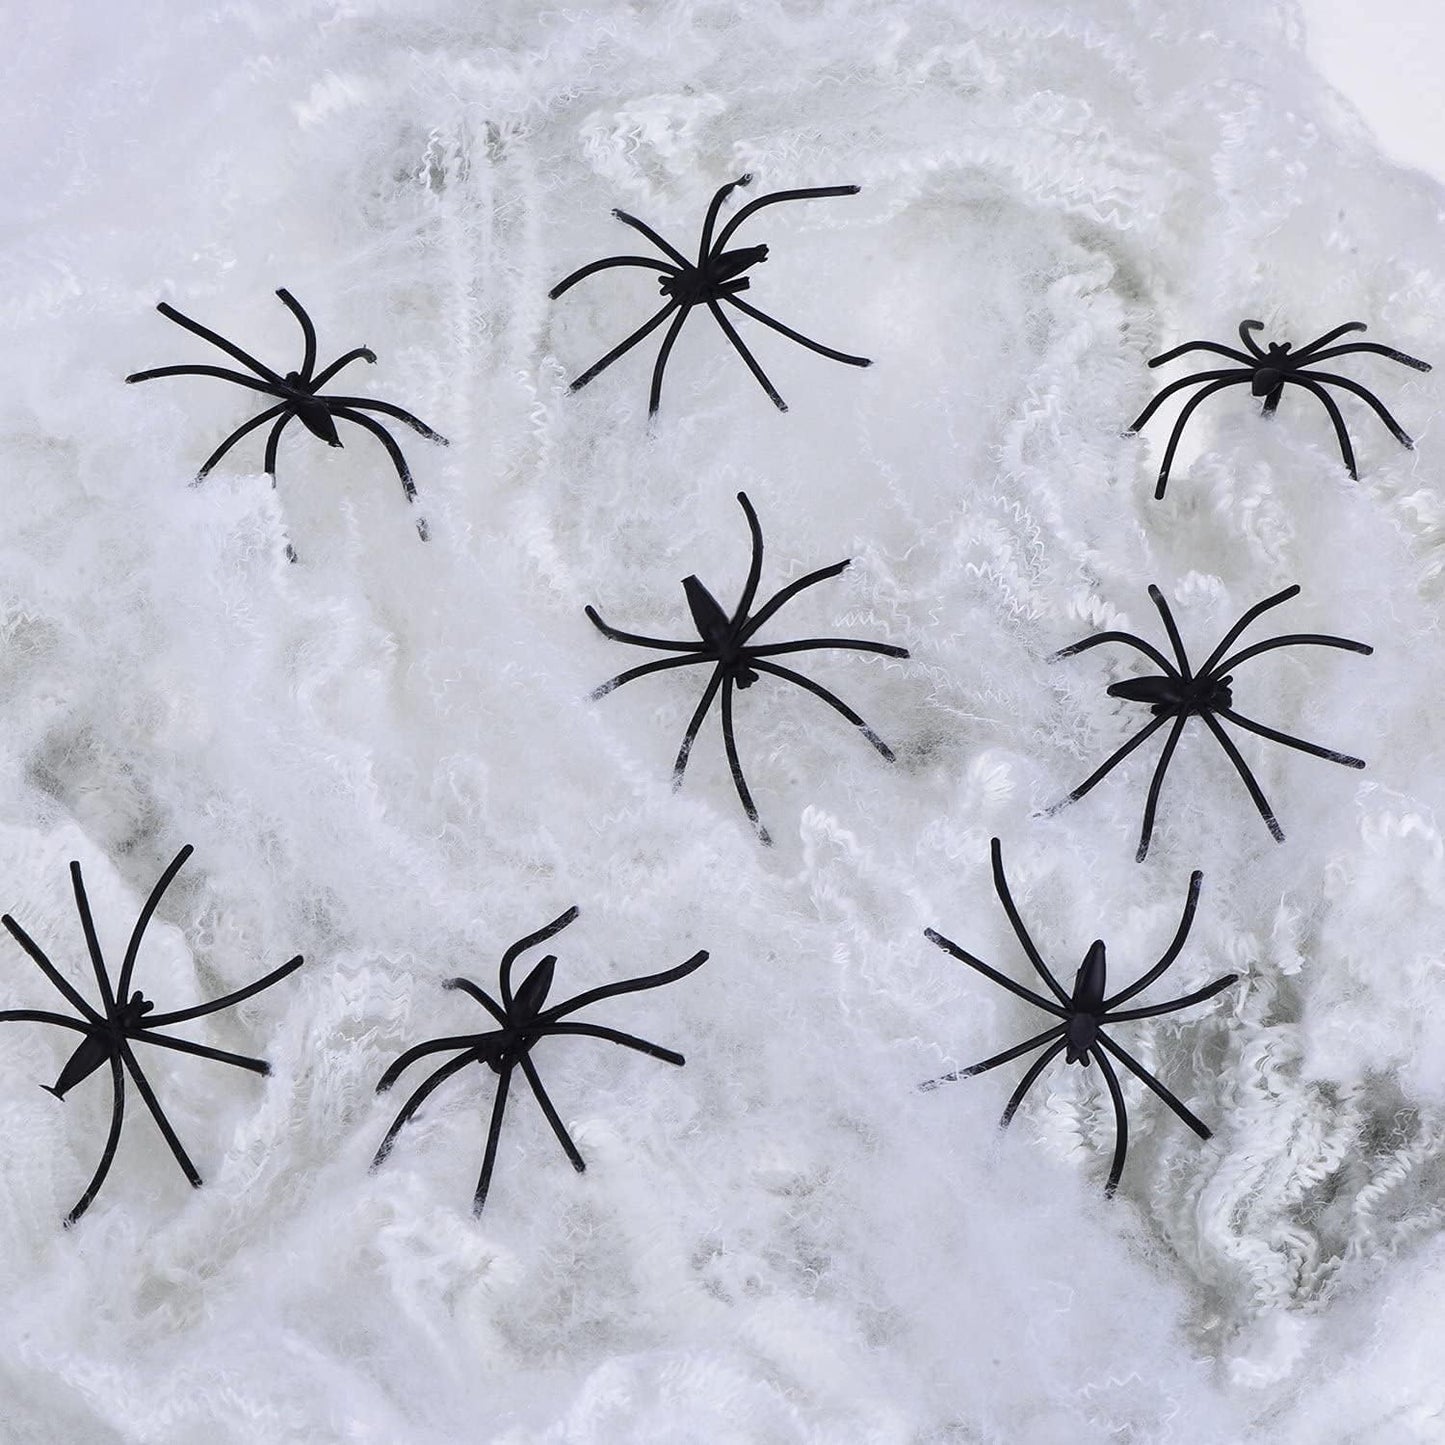 Black Plastic Halloween Spiders - Spooky & Scary, 5cm Each, Durable Material